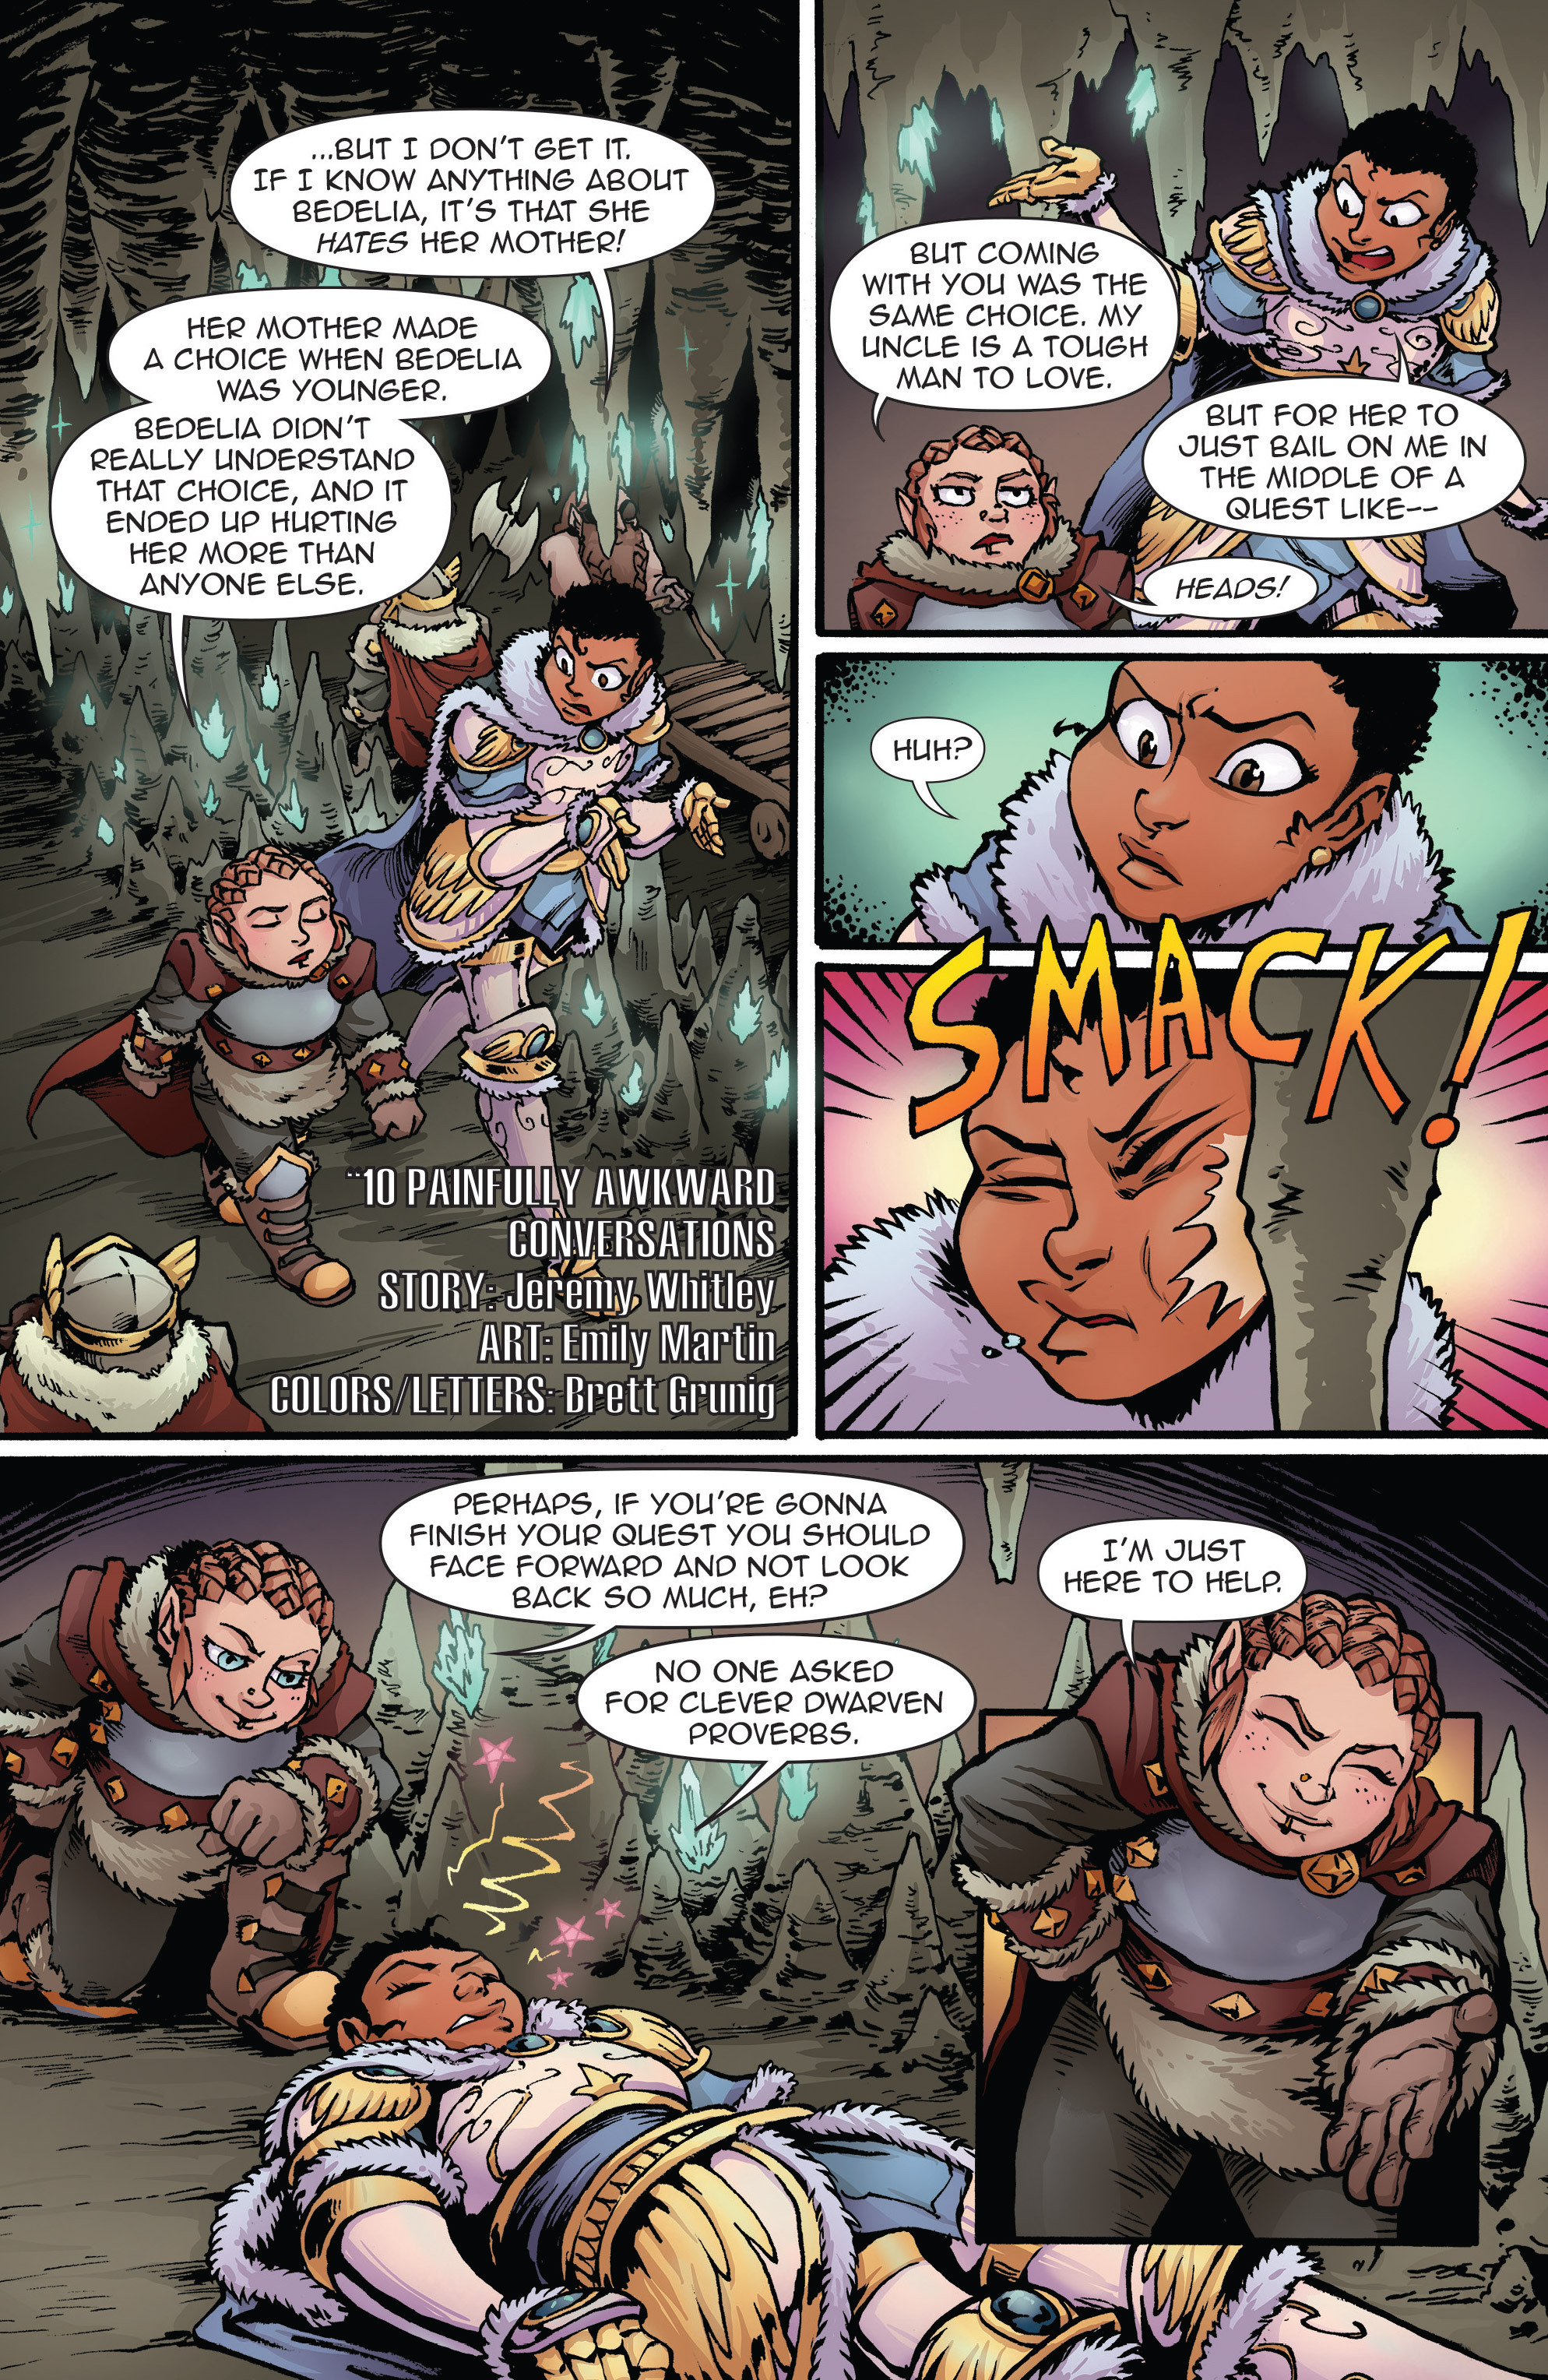 Read online Princeless: Make Yourself comic -  Issue #3 - 2